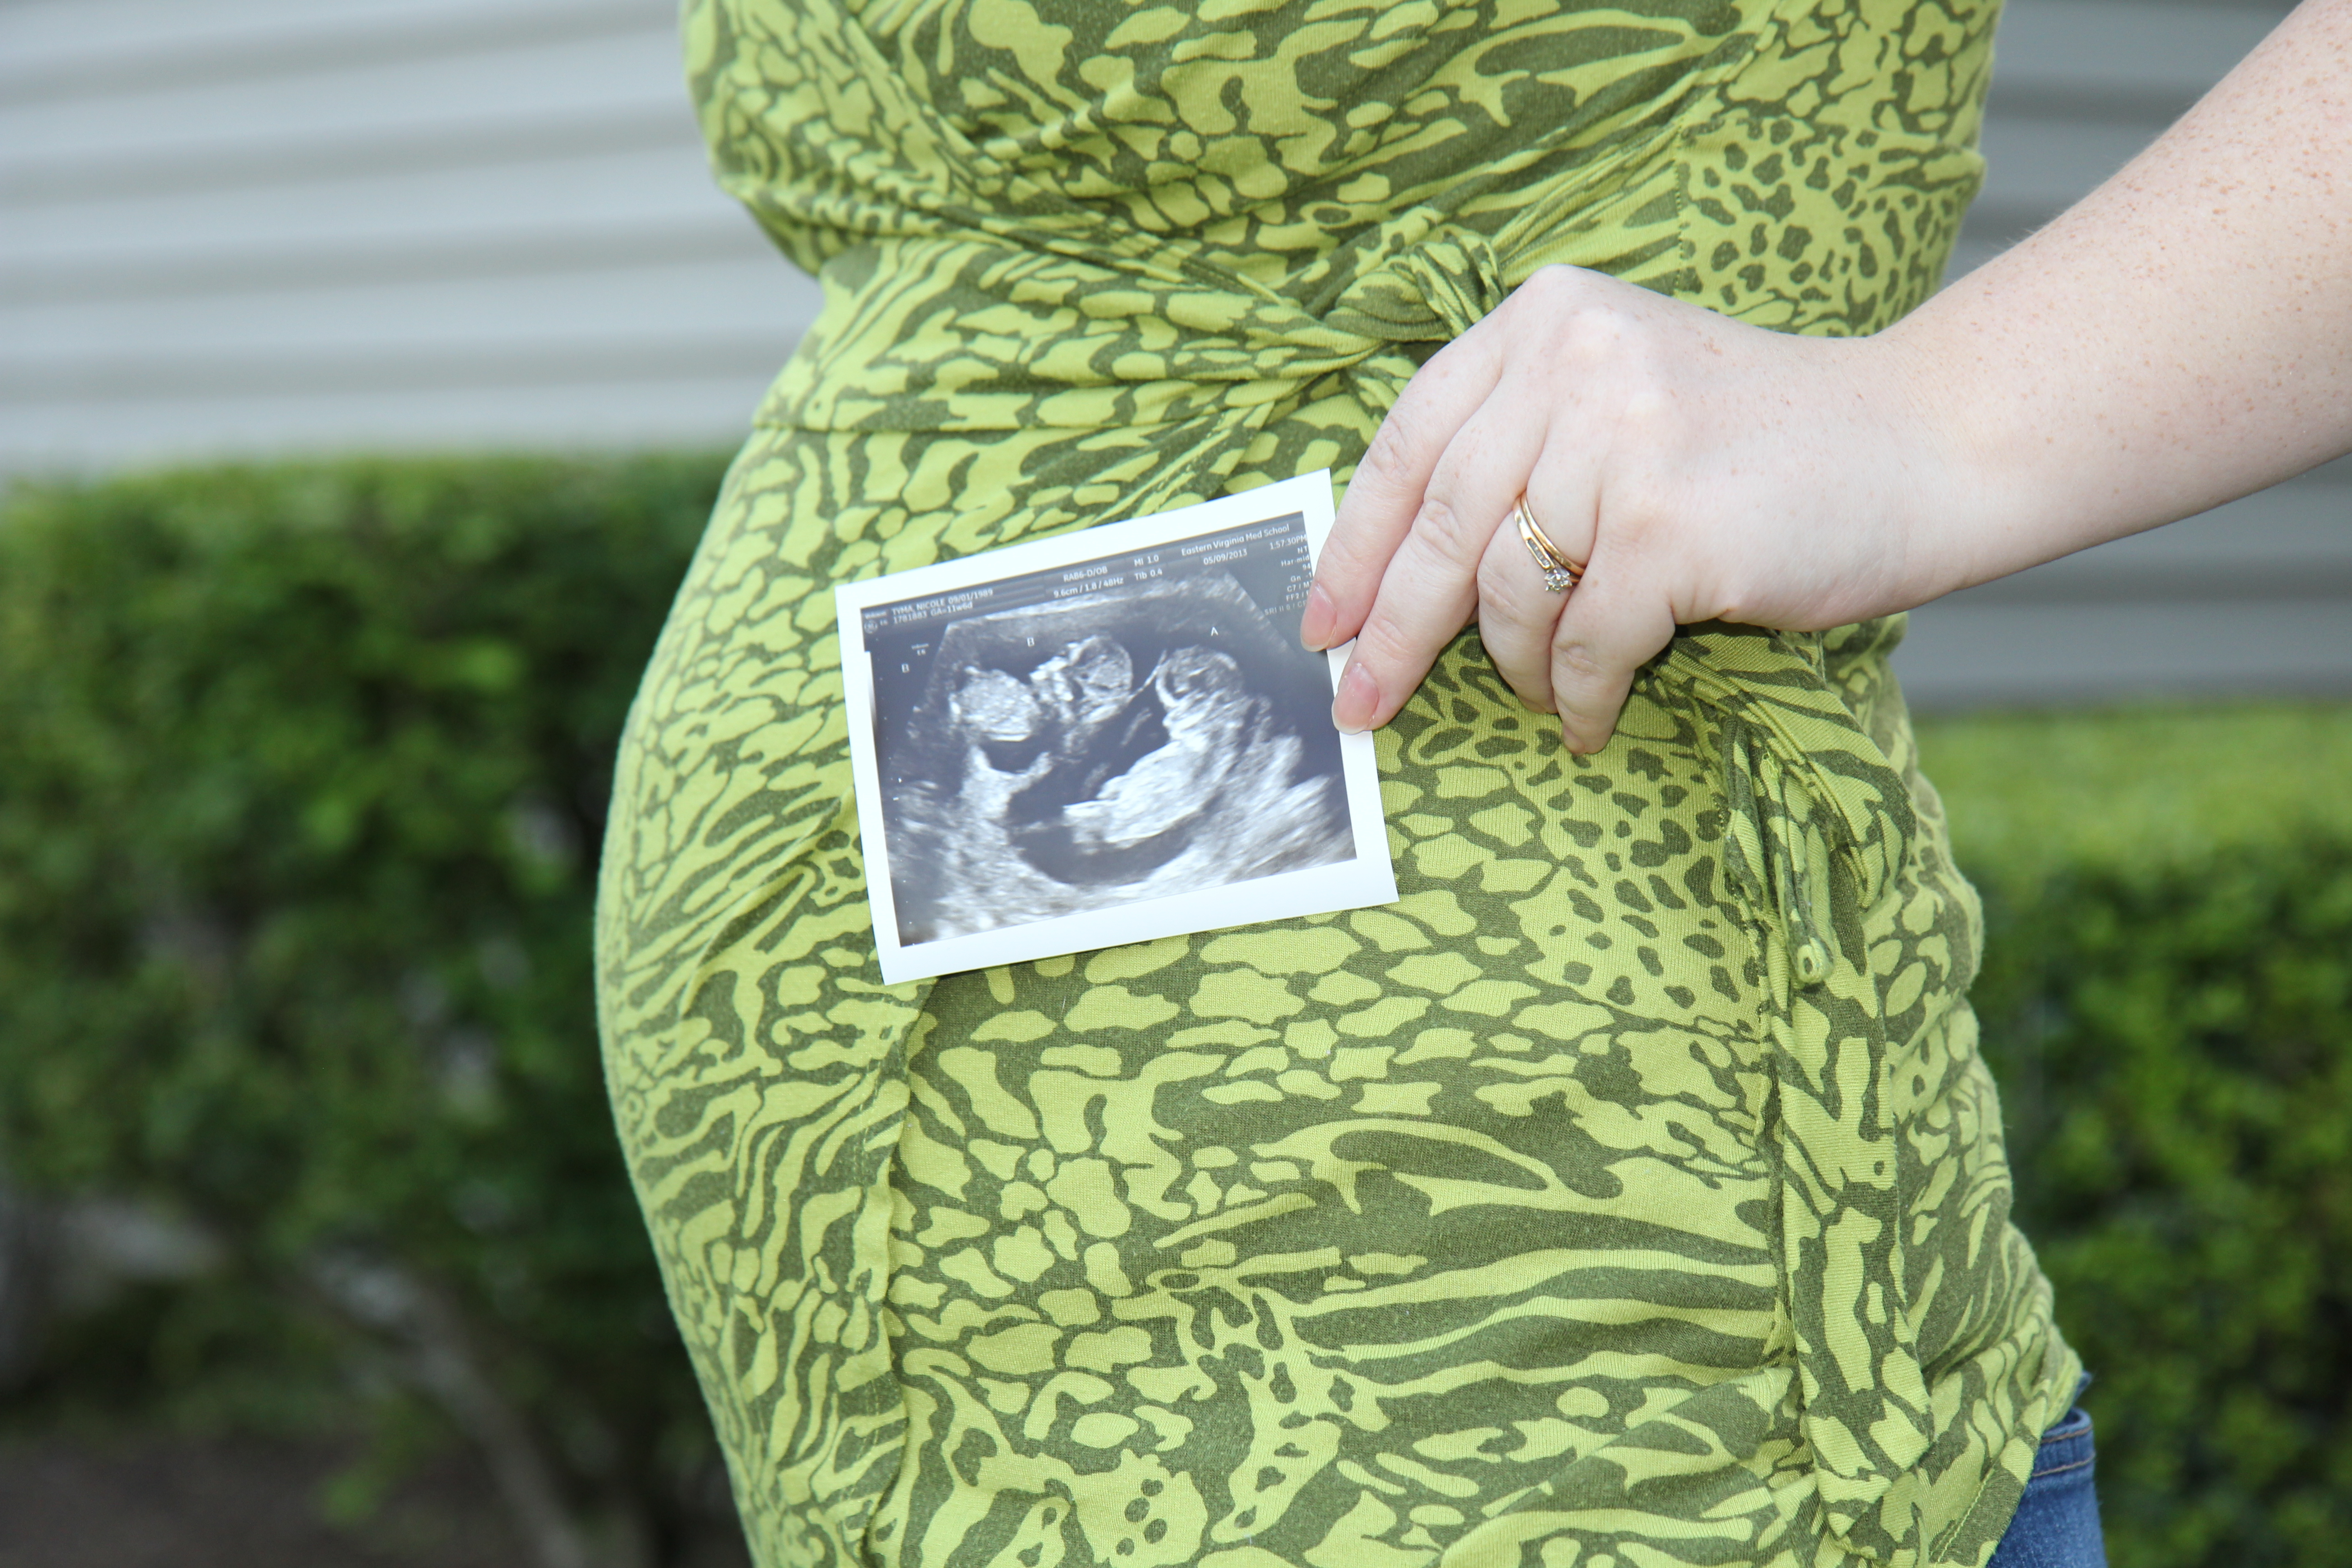 How does surrogacy work?